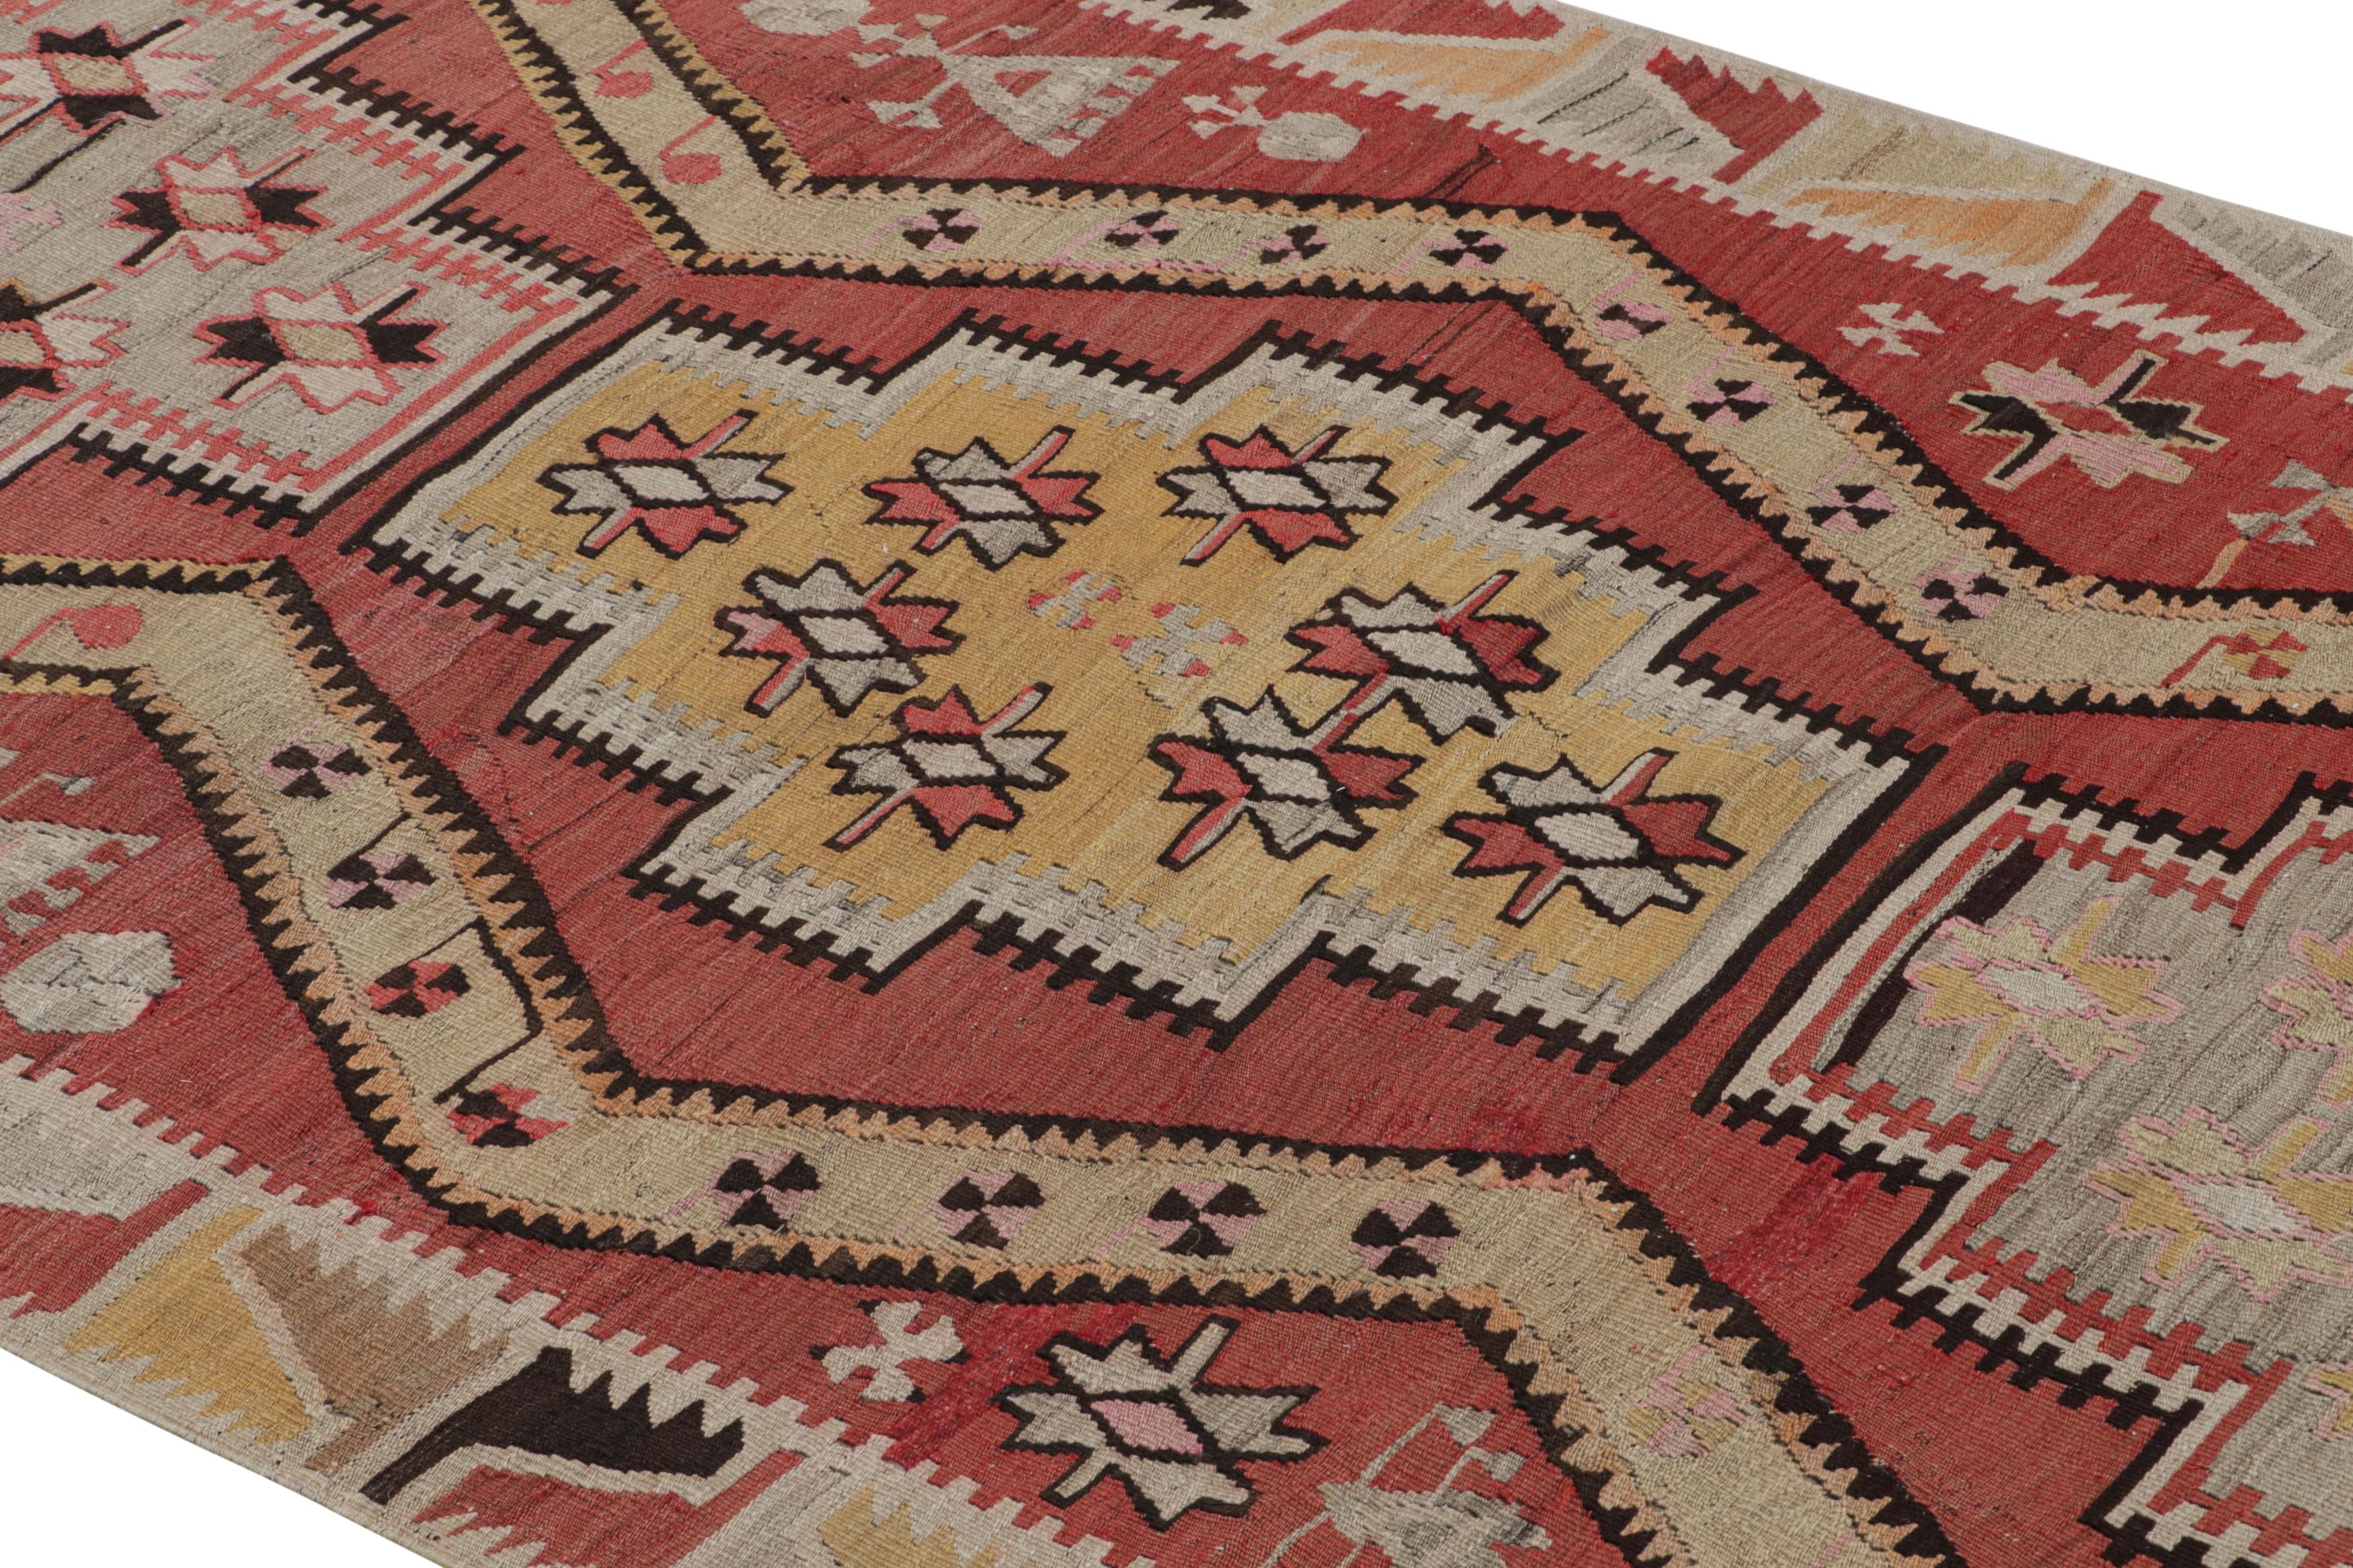 Flat-woven in high-quality wool originating from Turkey between 1930-1940, this vintage Kayseri Kilim rug enjoys inviting floral and subtle tribal imagery throughout the expansive field design, further highlighted by the mirroring of pastel red,